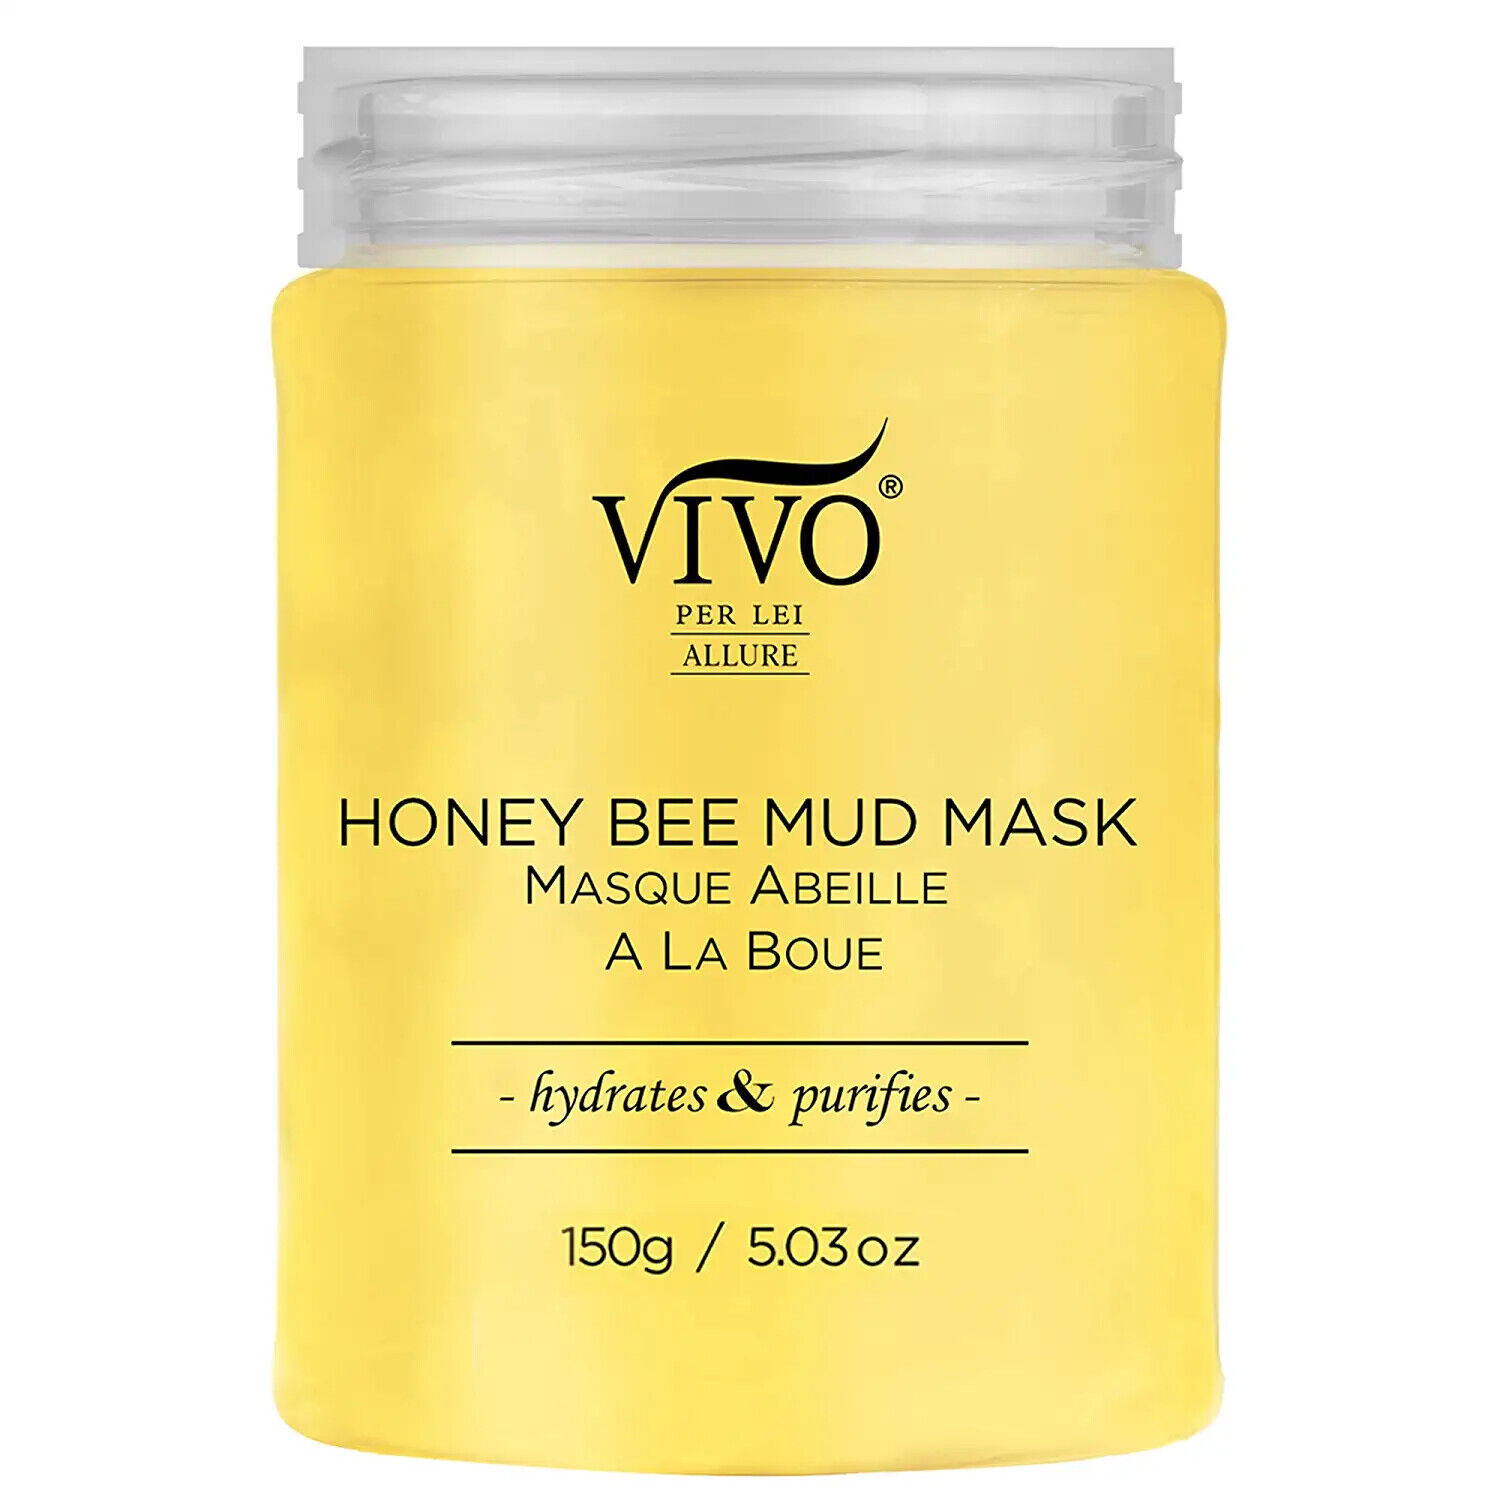 Vivo Per Lei HoneyBee Mud Mask For Deep Cleansing Purifying Anti Aging Face Mask